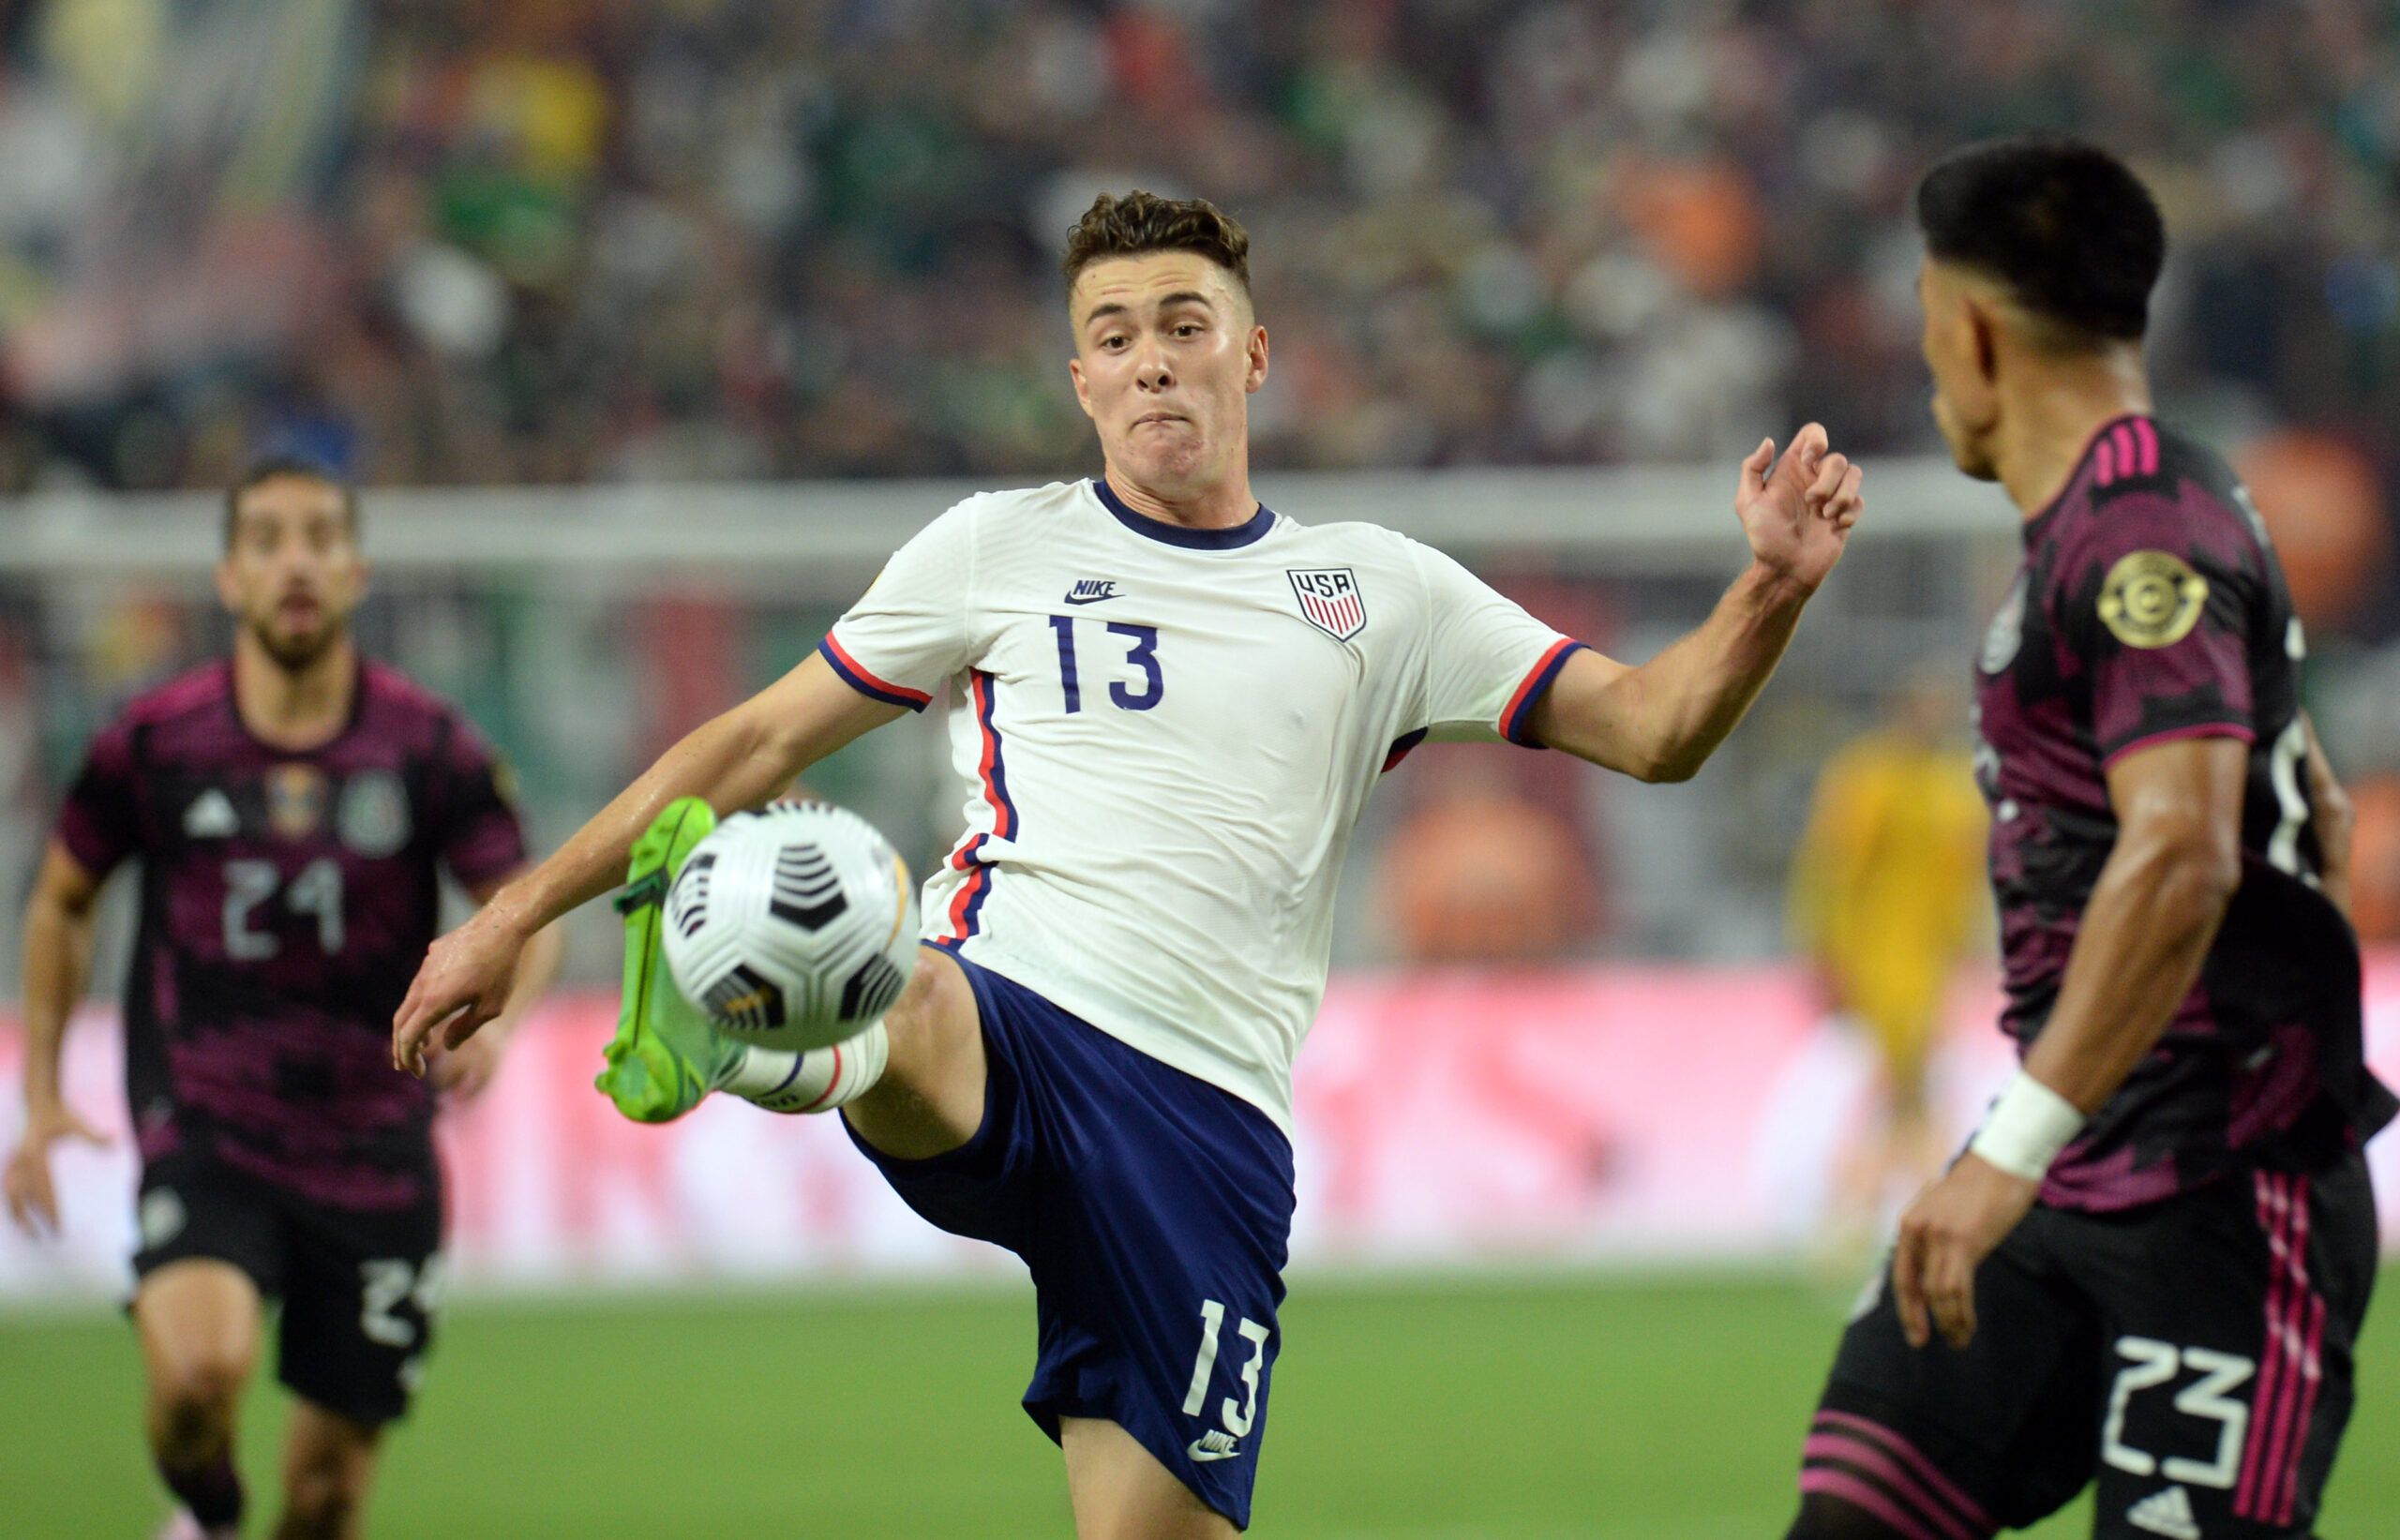 Aug 1, 2021; Las Vegas, Nevada, USA; United States forward Matthew Hoppe (13) controls the ball against Mexico CONCACAF Gold Cup final soccer match at Allegiant Stadium. Mandatory Credit: Joe Camporeale-USA TODAY Sports